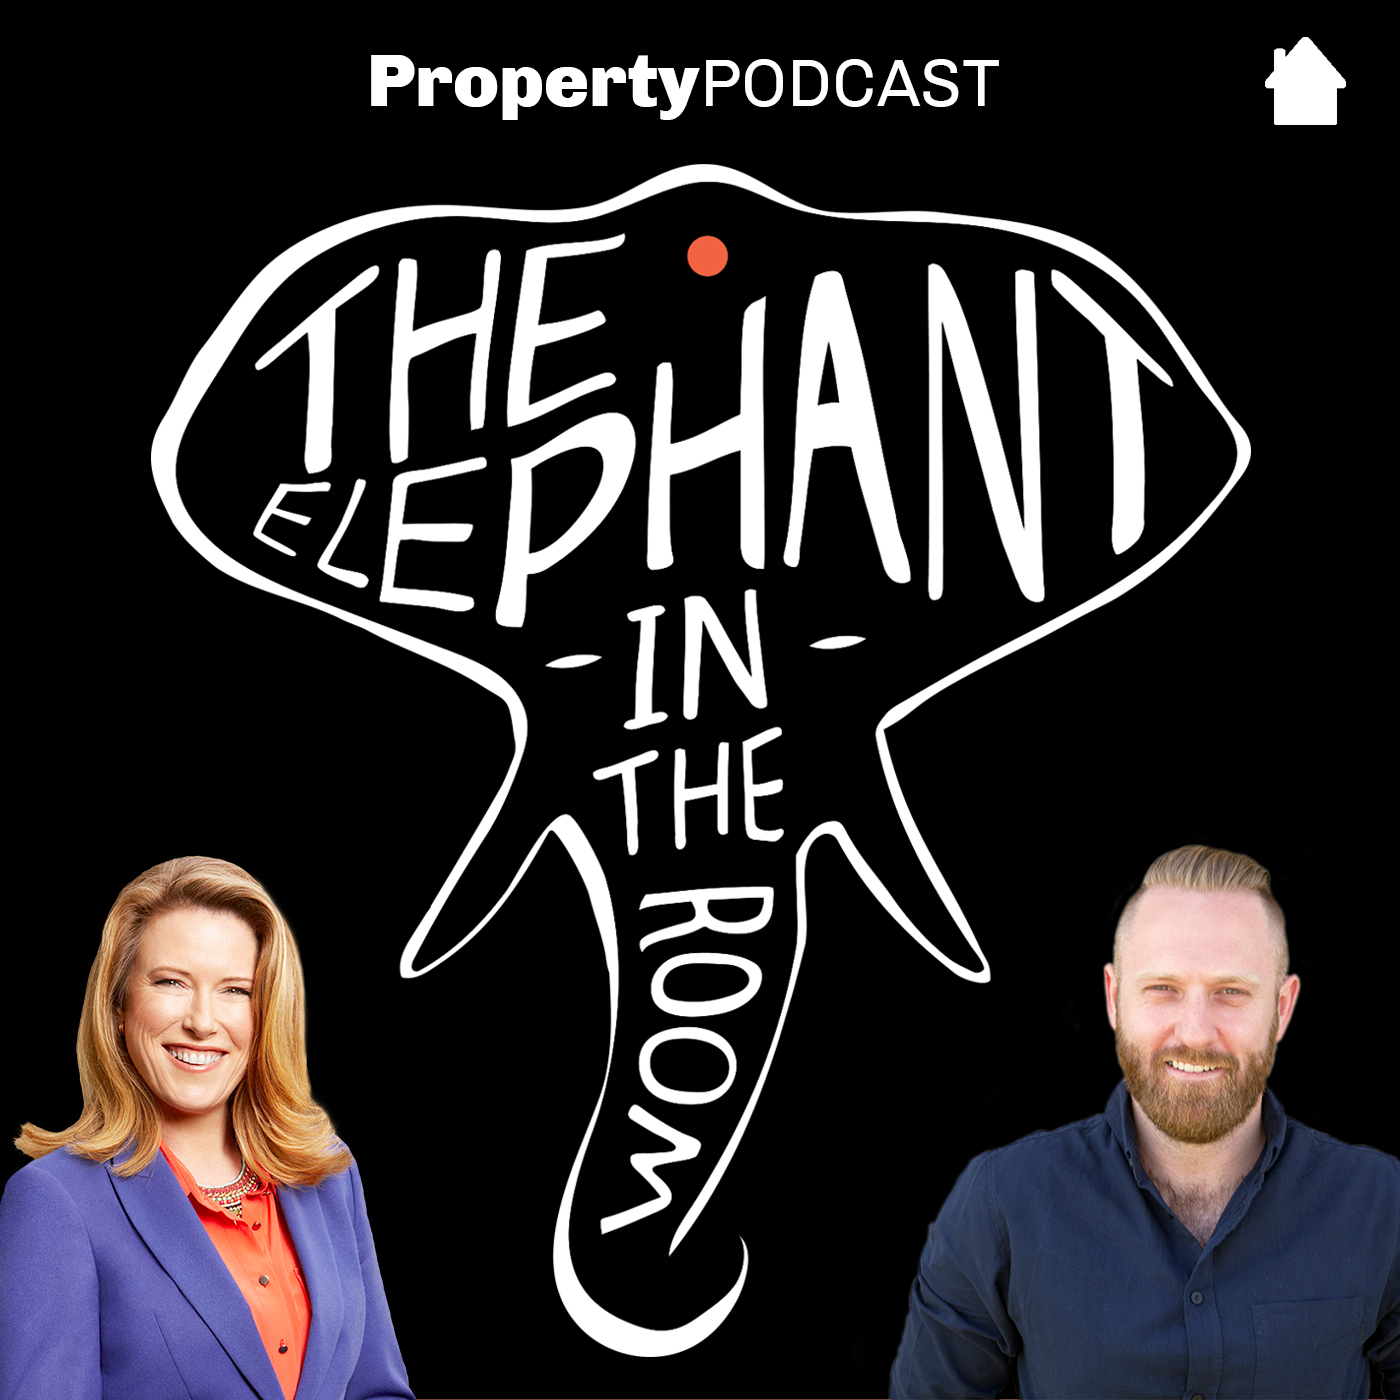 Dr Tim Sharp | Does owning a house = happiness?